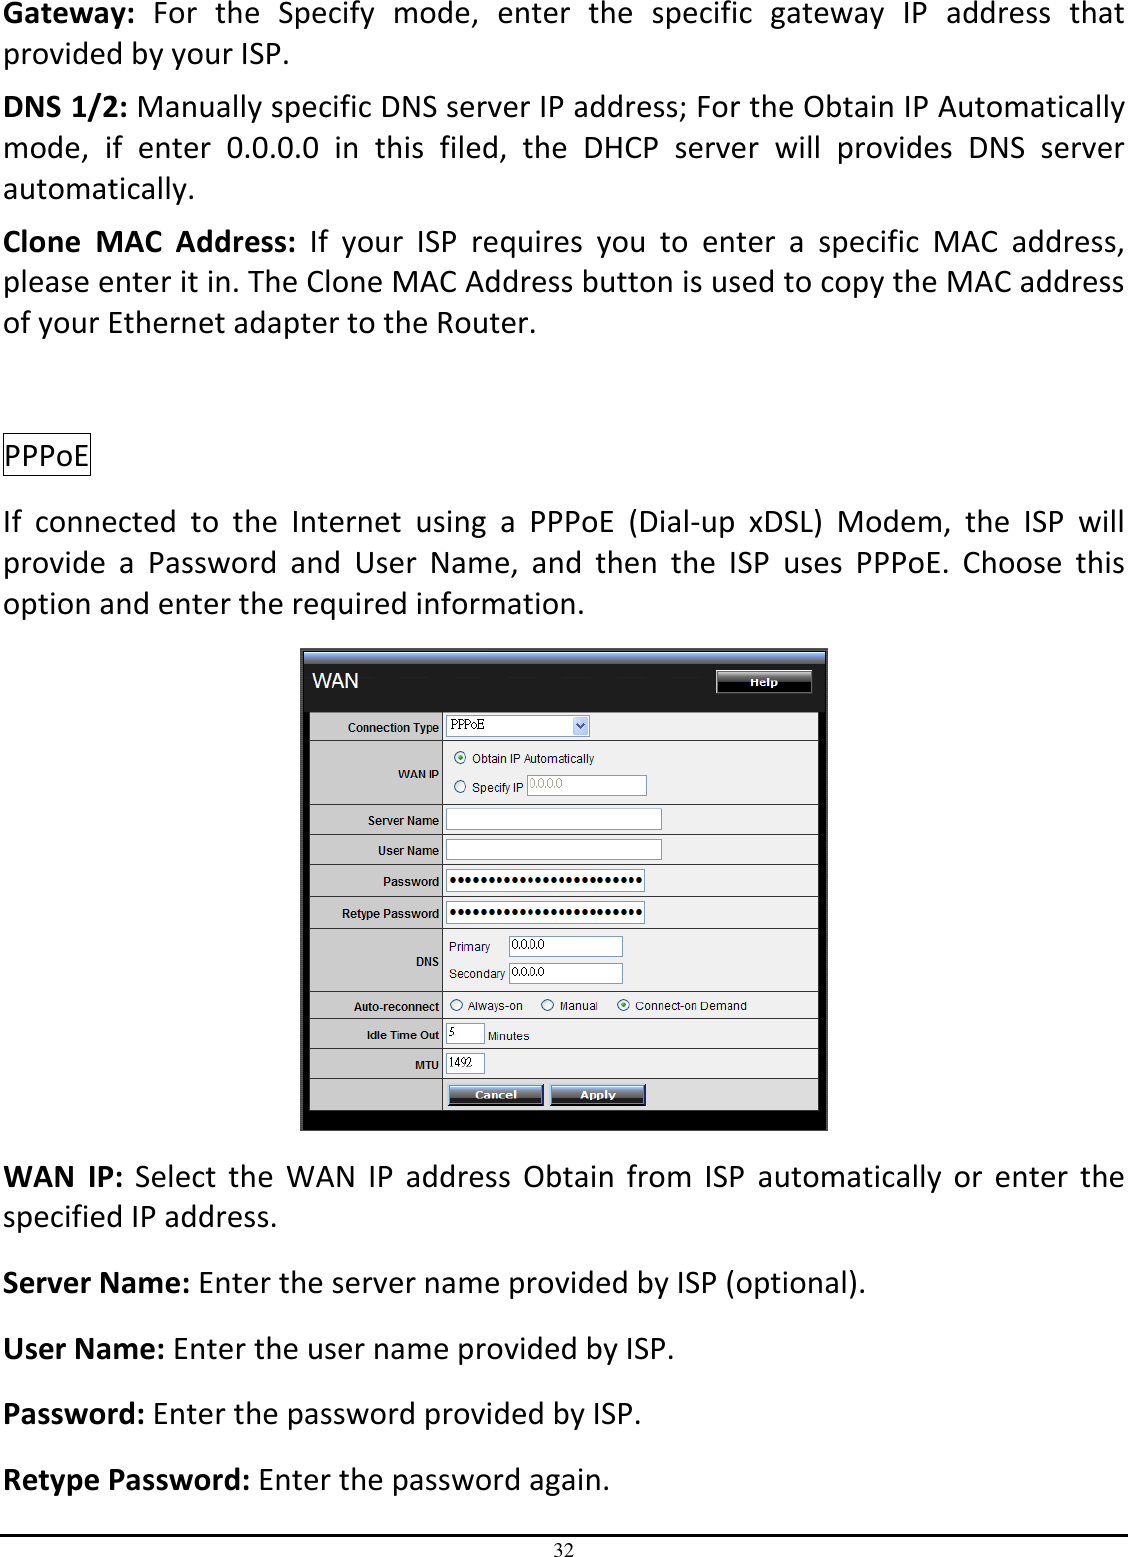 32 Gateway:  For  the  Specify  mode,  enter  the  specific  gateway  IP  address  that provided by your ISP. DNS 1/2: Manually specific DNS server IP address; For the Obtain IP Automatically mode,  if  enter  0.0.0.0  in  this  filed,  the  DHCP  server  will  provides  DNS  server automatically. Clone  MAC  Address:  If  your  ISP  requires  you  to  enter  a  specific  MAC  address, please enter it in. The Clone MAC Address button is used to copy the MAC address of your Ethernet adapter to the Router.  PPPoE  If  connected  to  the  Internet  using  a  PPPoE  (Dial-up  xDSL)  Modem,  the  ISP  will provide  a  Password  and  User  Name,  and  then  the  ISP  uses  PPPoE.  Choose  this option and enter the required information.  WAN  IP:  Select the  WAN IP  address  Obtain  from ISP  automatically  or  enter the specified IP address. Server Name: Enter the server name provided by ISP (optional). User Name: Enter the user name provided by ISP. Password: Enter the password provided by ISP. Retype Password: Enter the password again. 